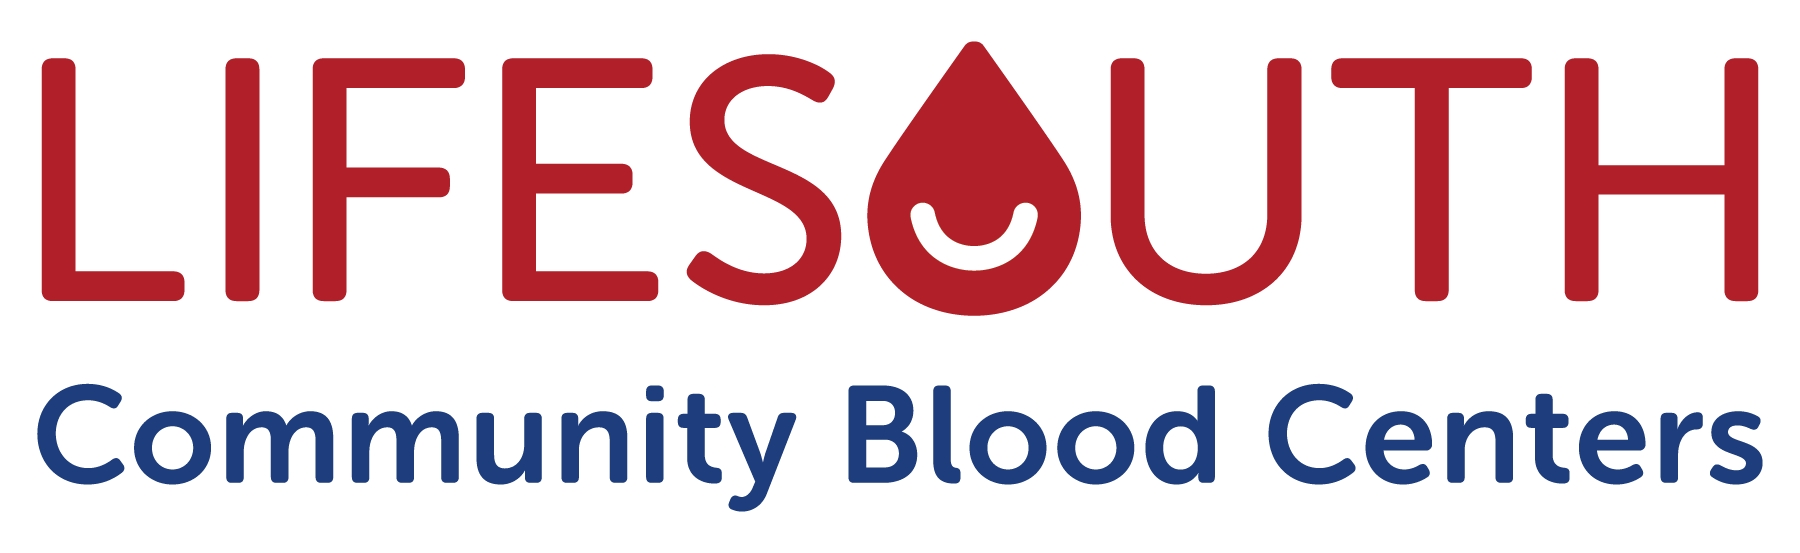 LifeSouth Community Blood Centers, Inc